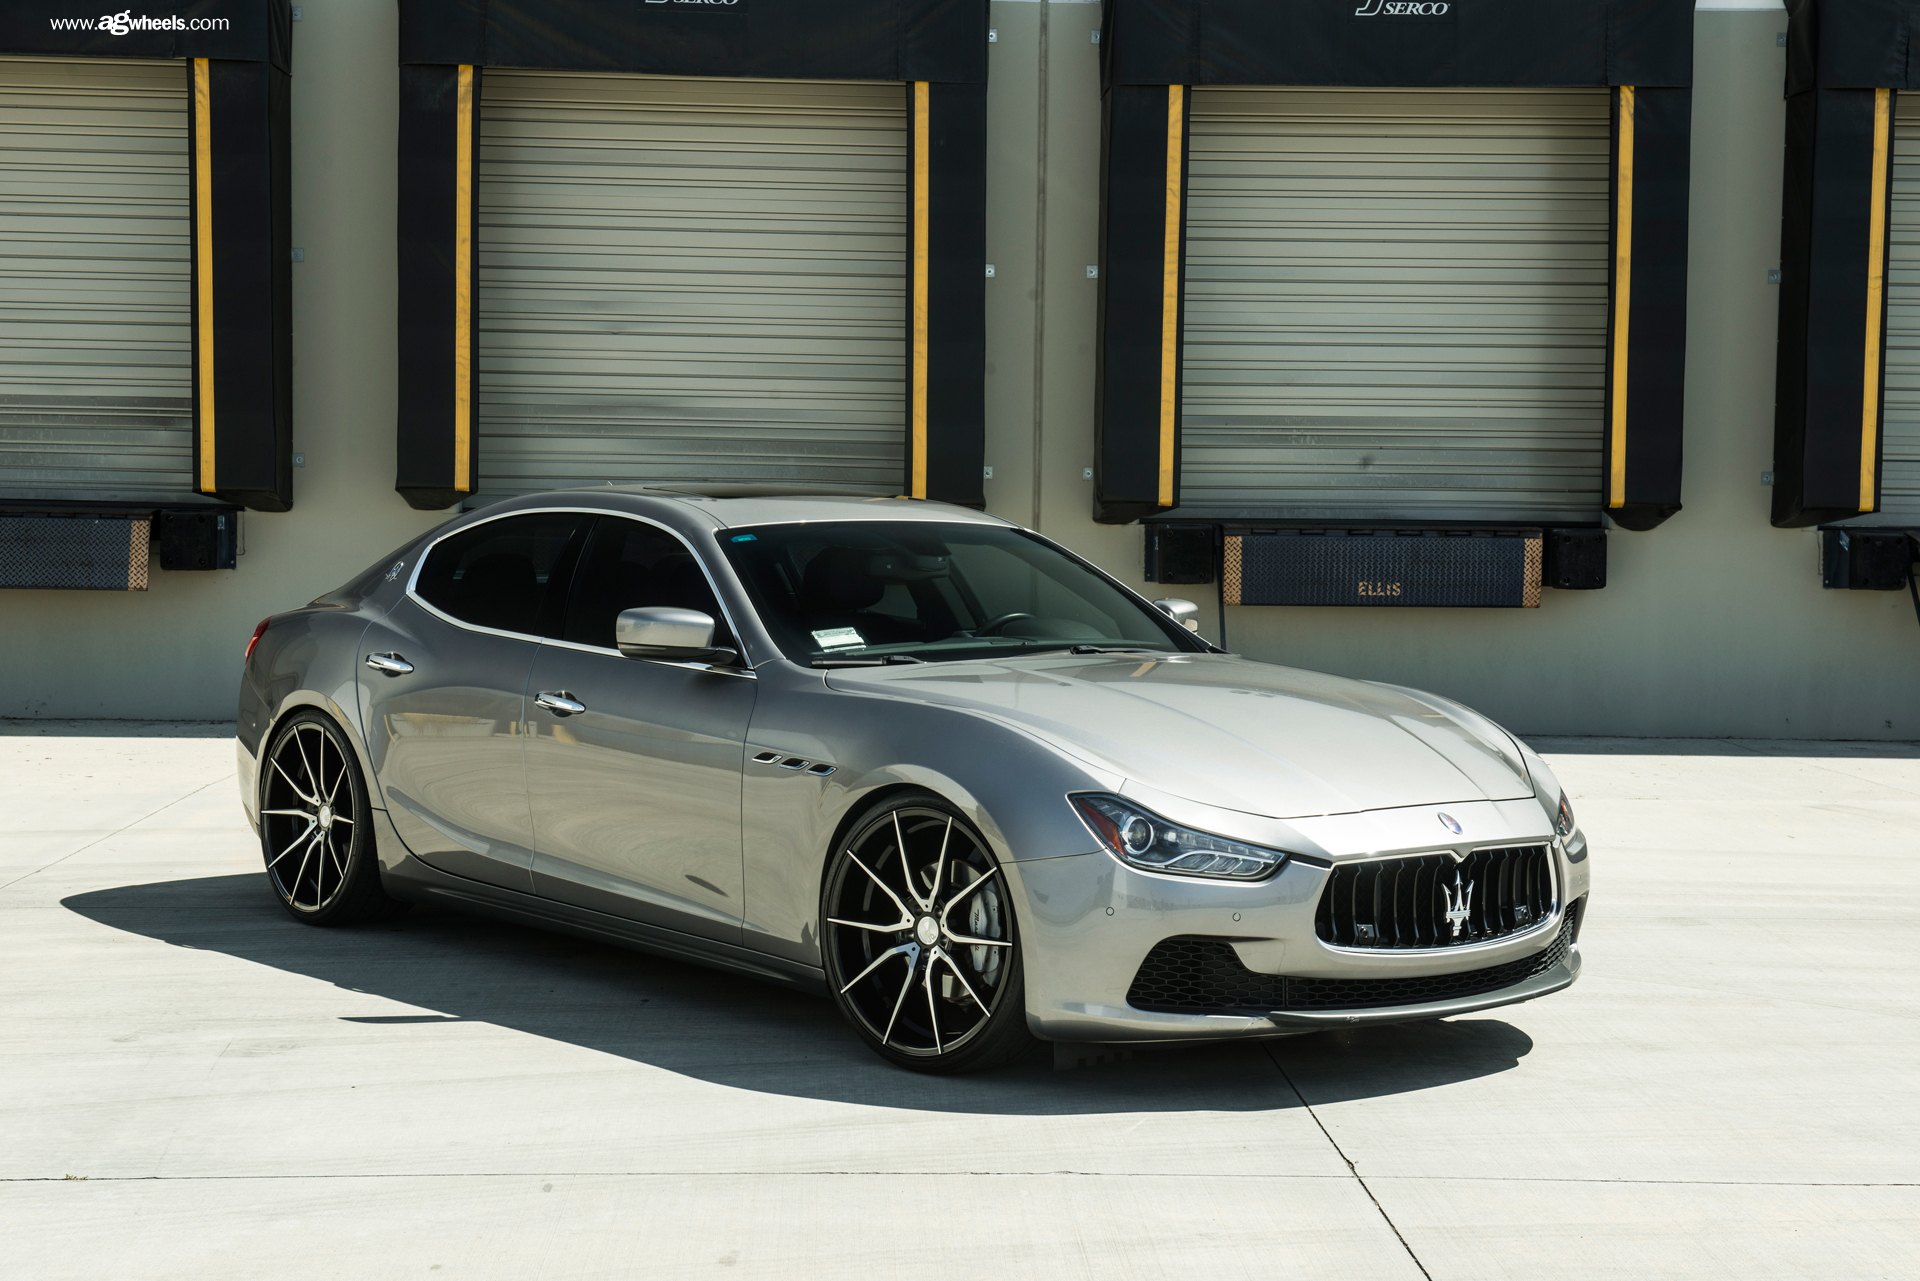 Silver Maserati Ghibli with Aftermarket Front Lip - Photo by Avant Garde Wheels